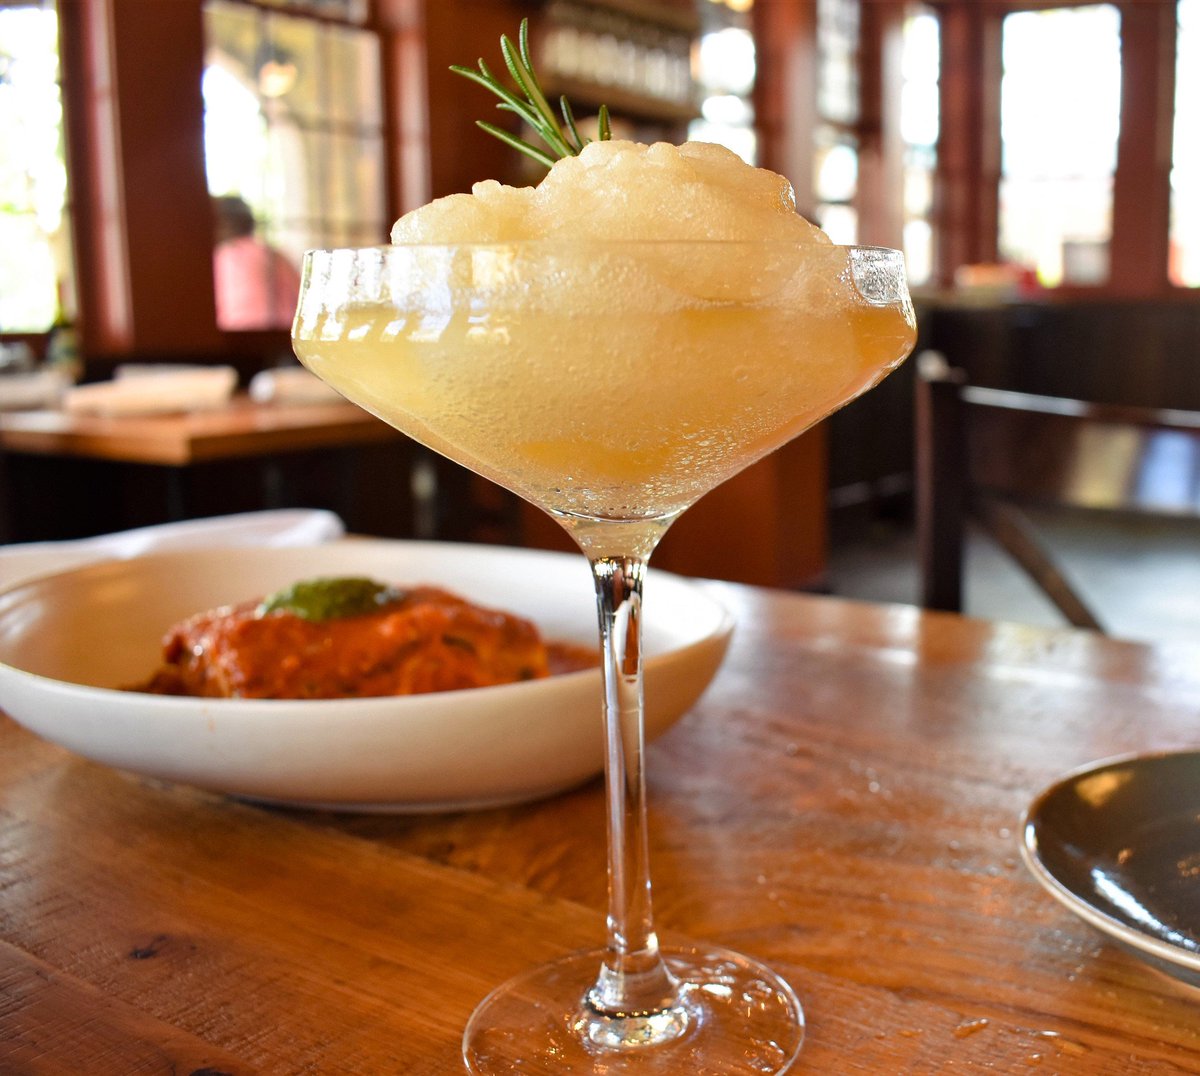 Cool off with this frozen favorite—Bellini. #TGIF #FrozenCocktail #cheers